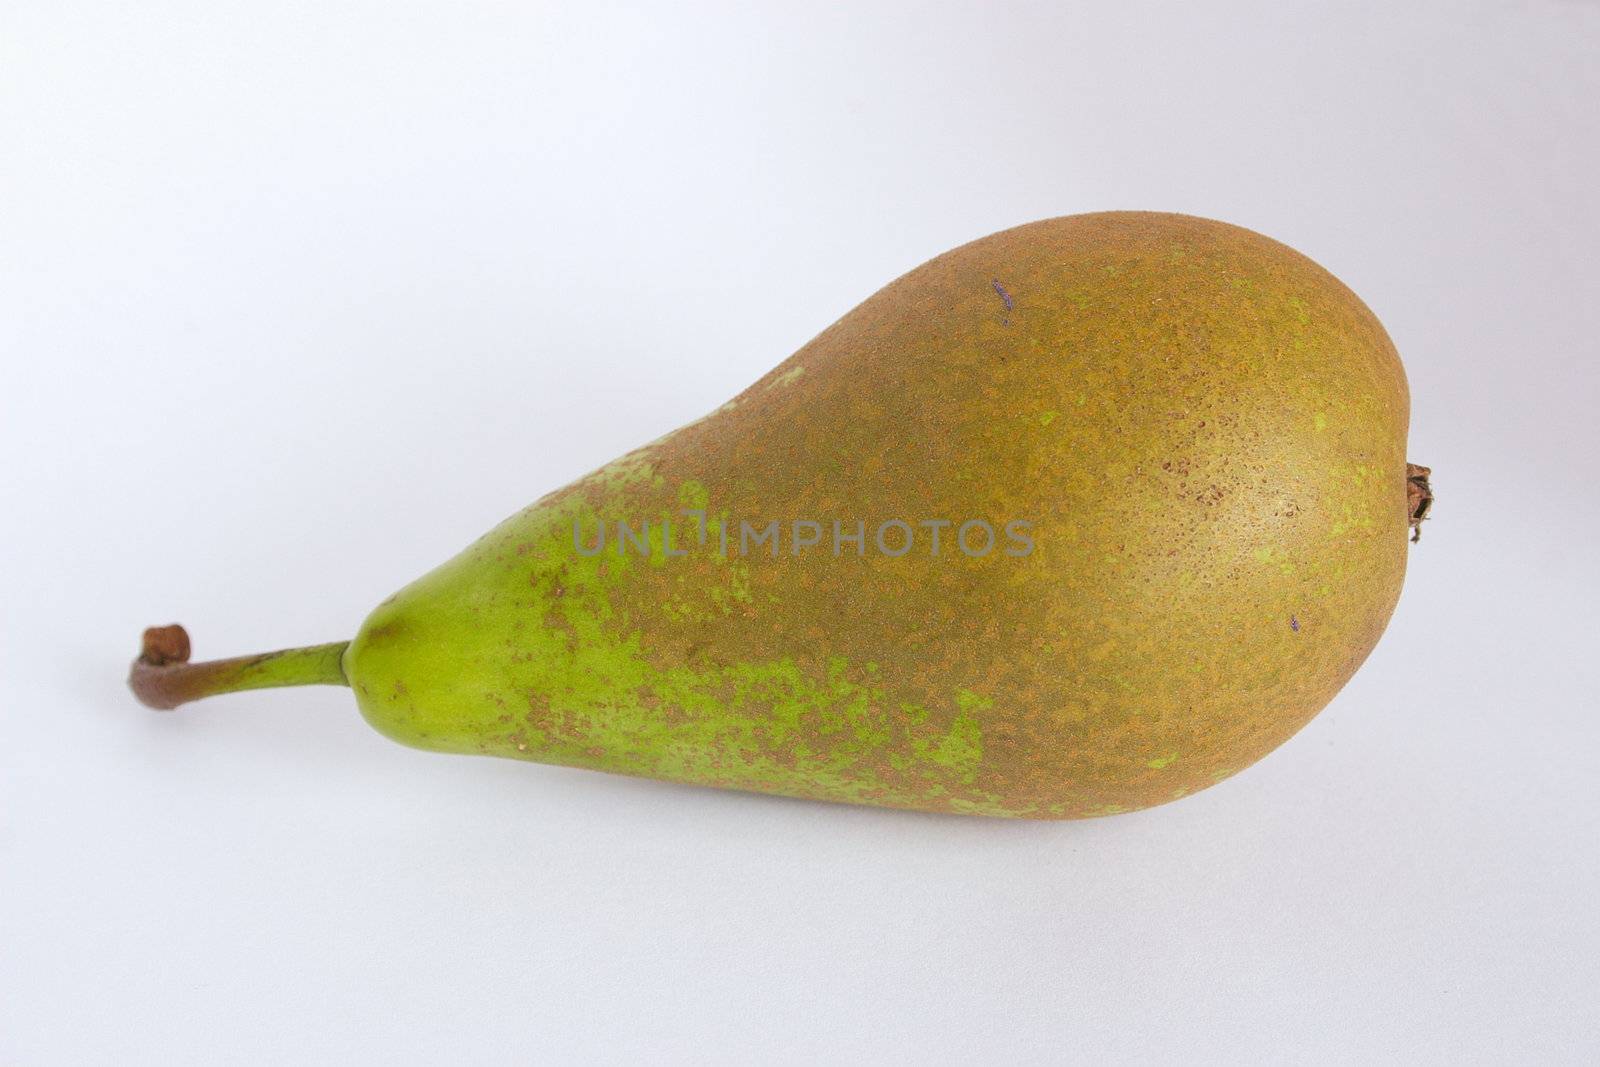 whole fresh conference pear against a light background